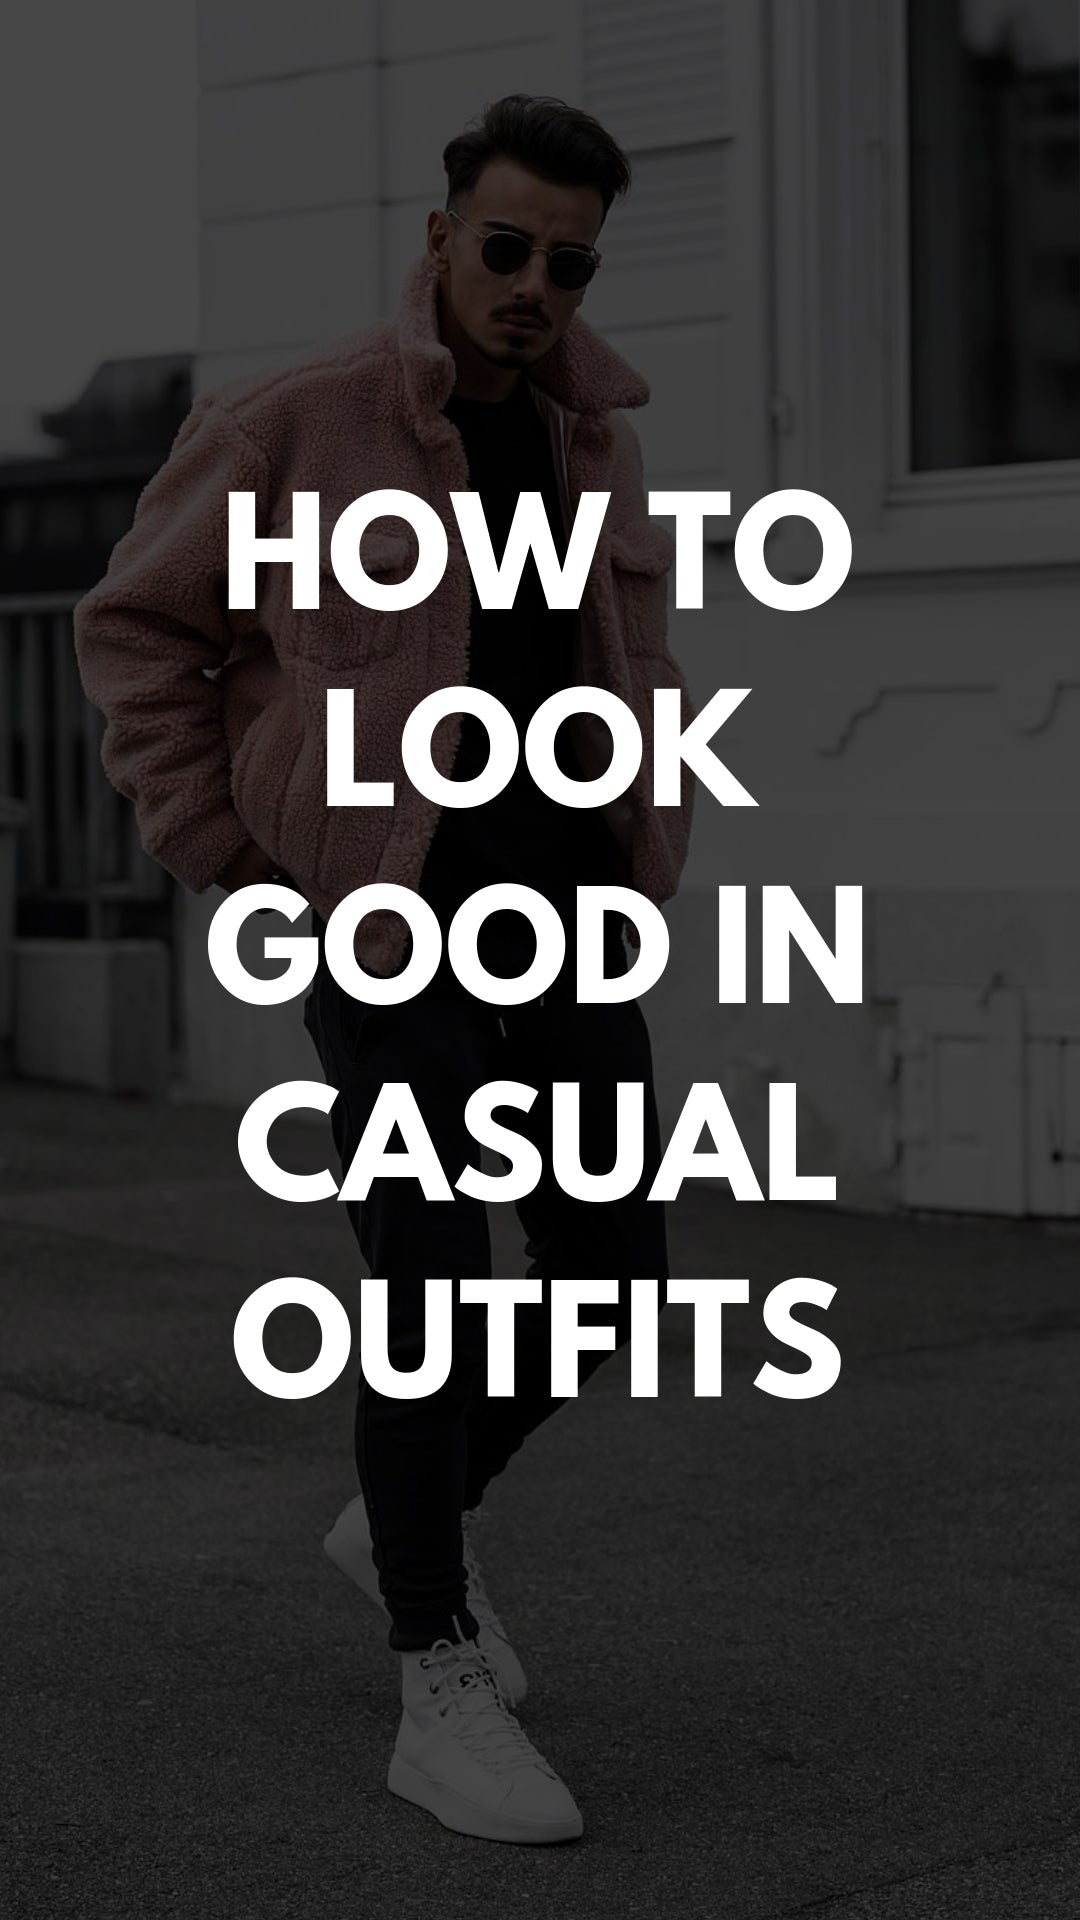 5 Casual Outfits For Guys #casual #outfits #mensfashion #streetstyle